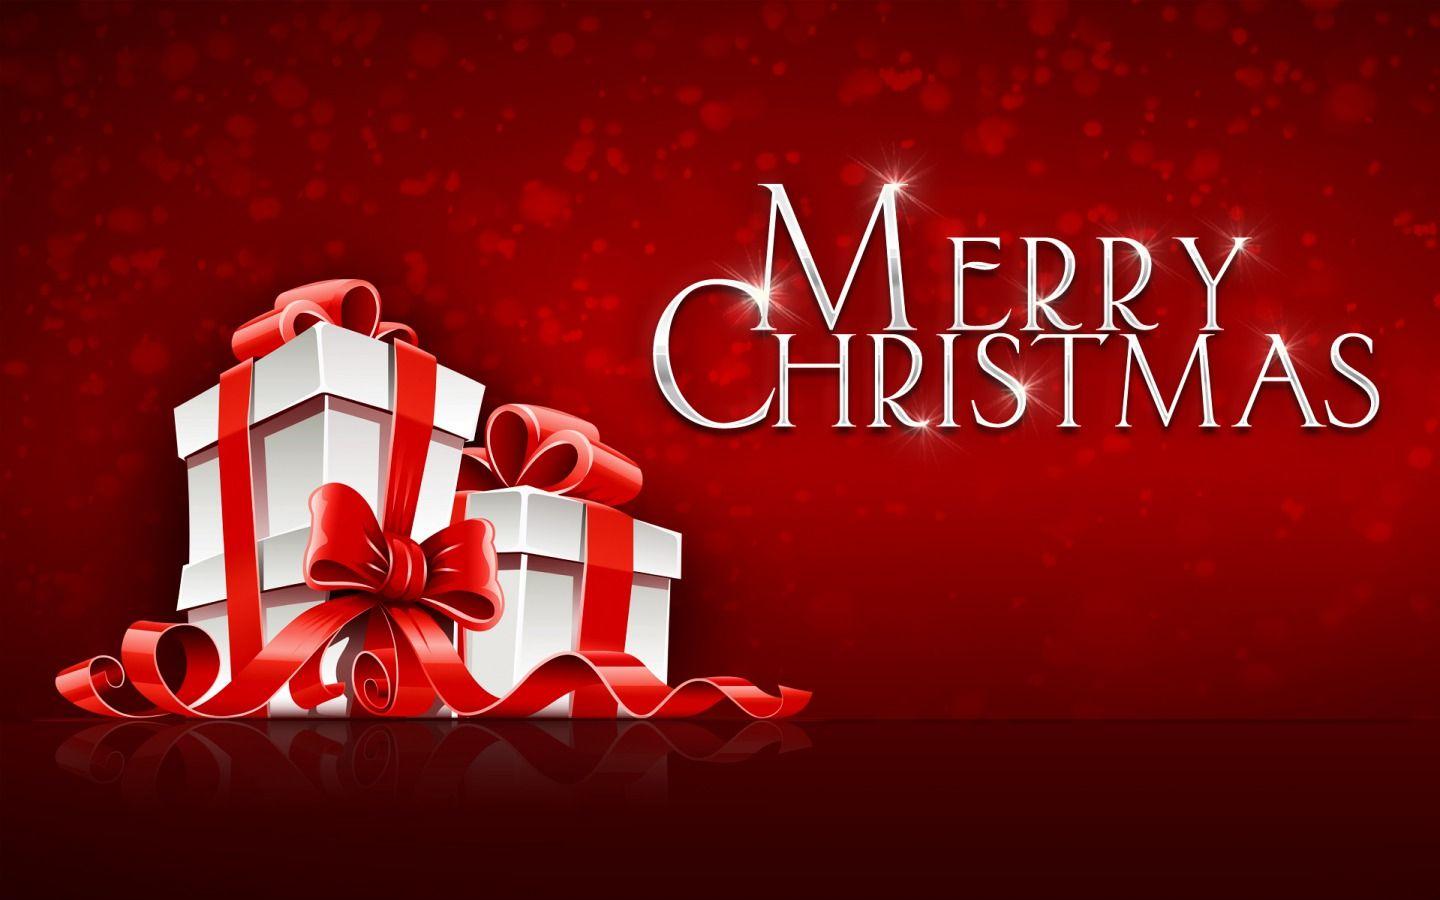 Merry Christmas Image Free Download. Merry Christmas 2014 Quotes